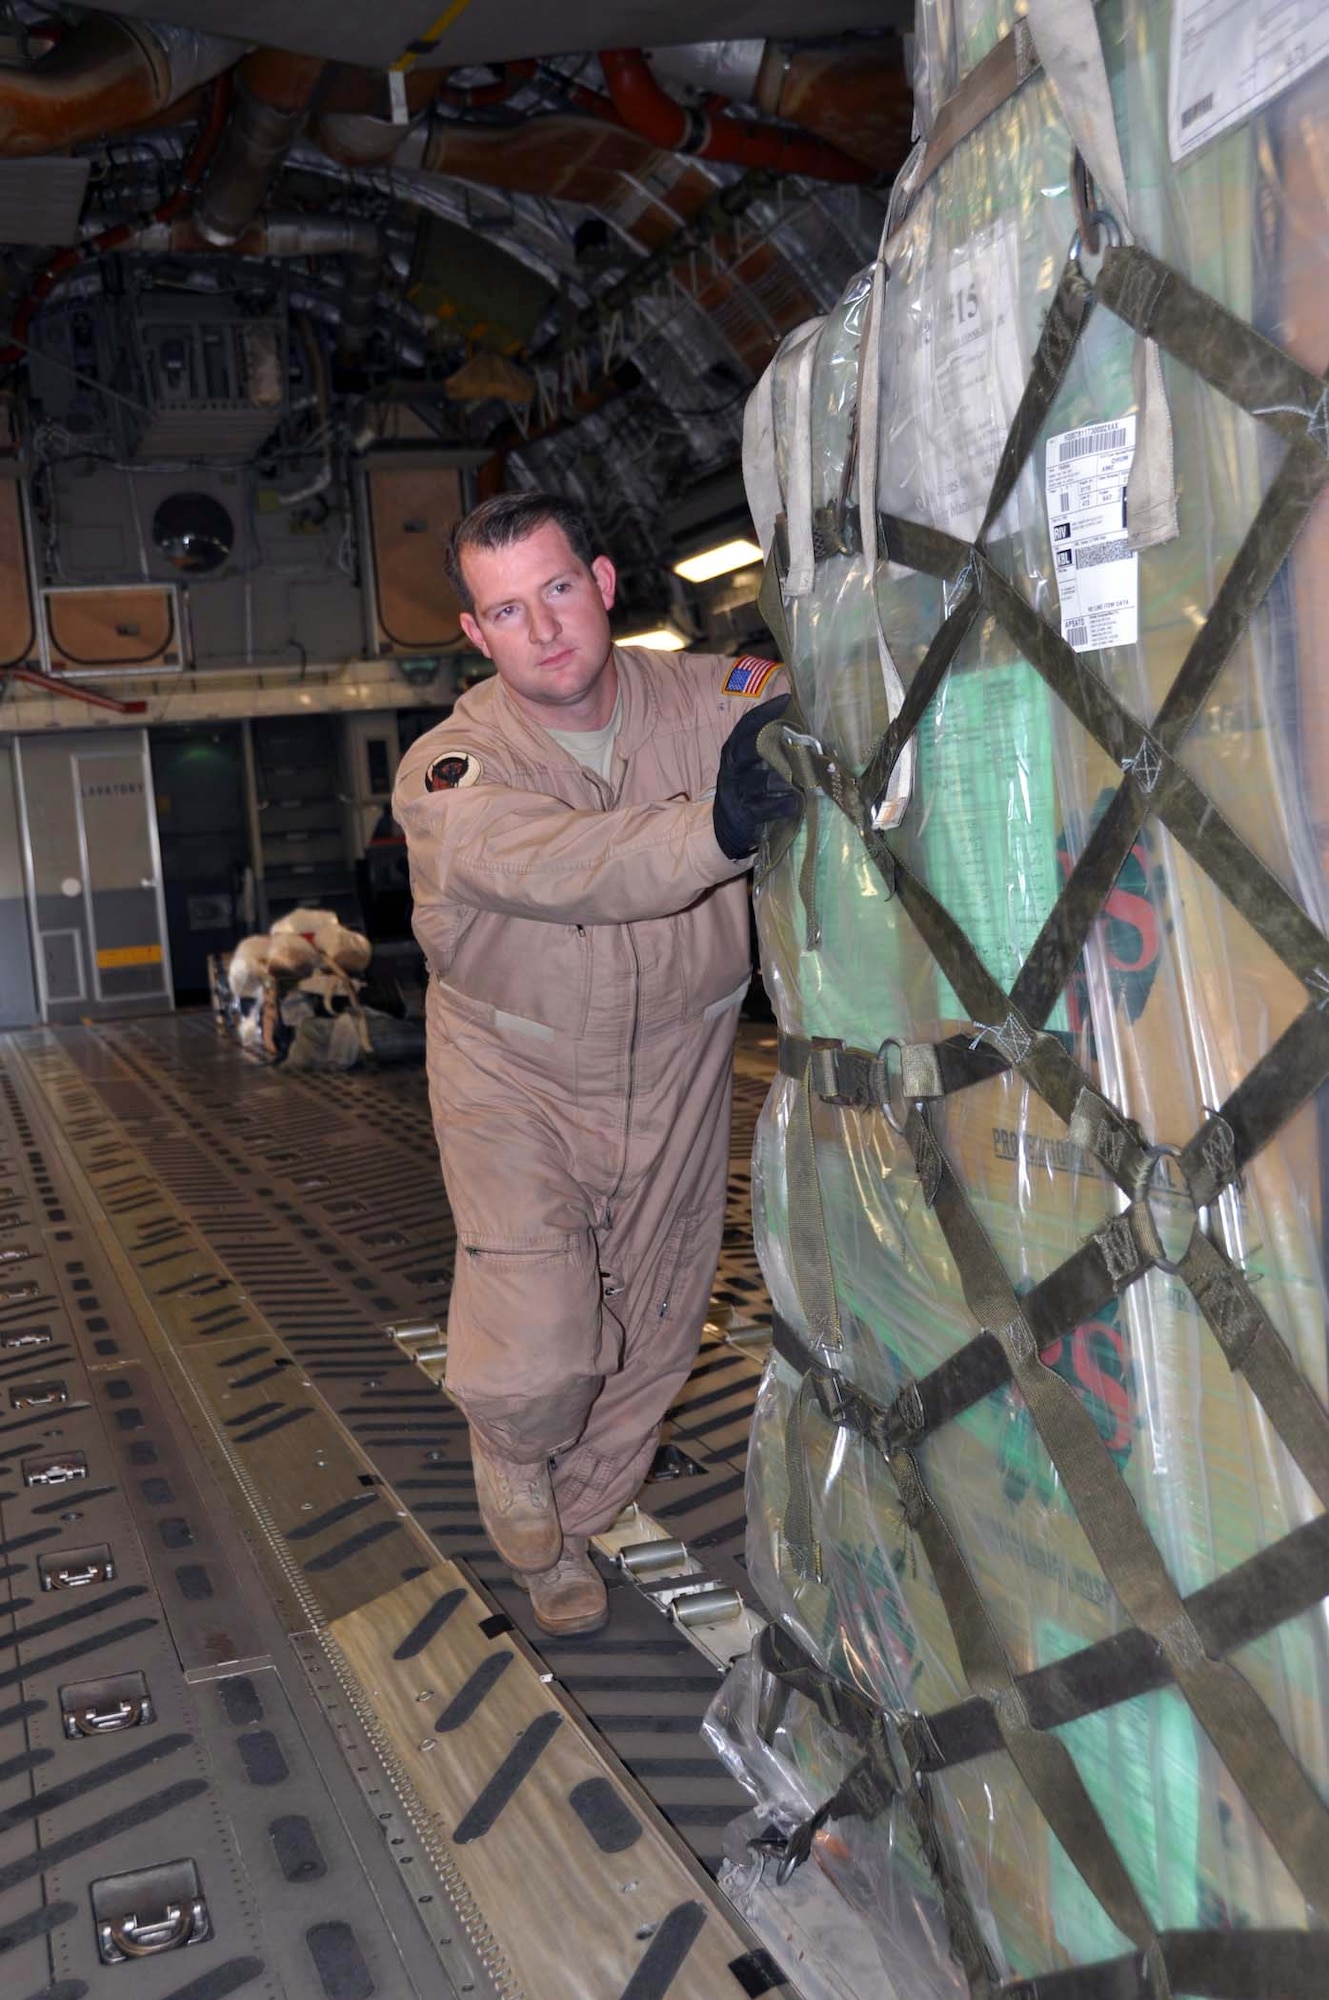 Tech. Sgt. Geoffrey Parish, 729th Airlift Squadron loadmaster, helps secure humanitarian supplies on a C-17 Globemaster III at March Field October 2, 2011.  Team March transported the cargo, donated by Women of Faith in Redlands, Calif., to Kabul, Afghanistan through the Denton Amendment program, a U.S. government program that allows humanitarian supplies to be shipped on military aircraft free of charge on a space available basis. (U.S. Air Force photo/Master Sgt. Linda Welz)